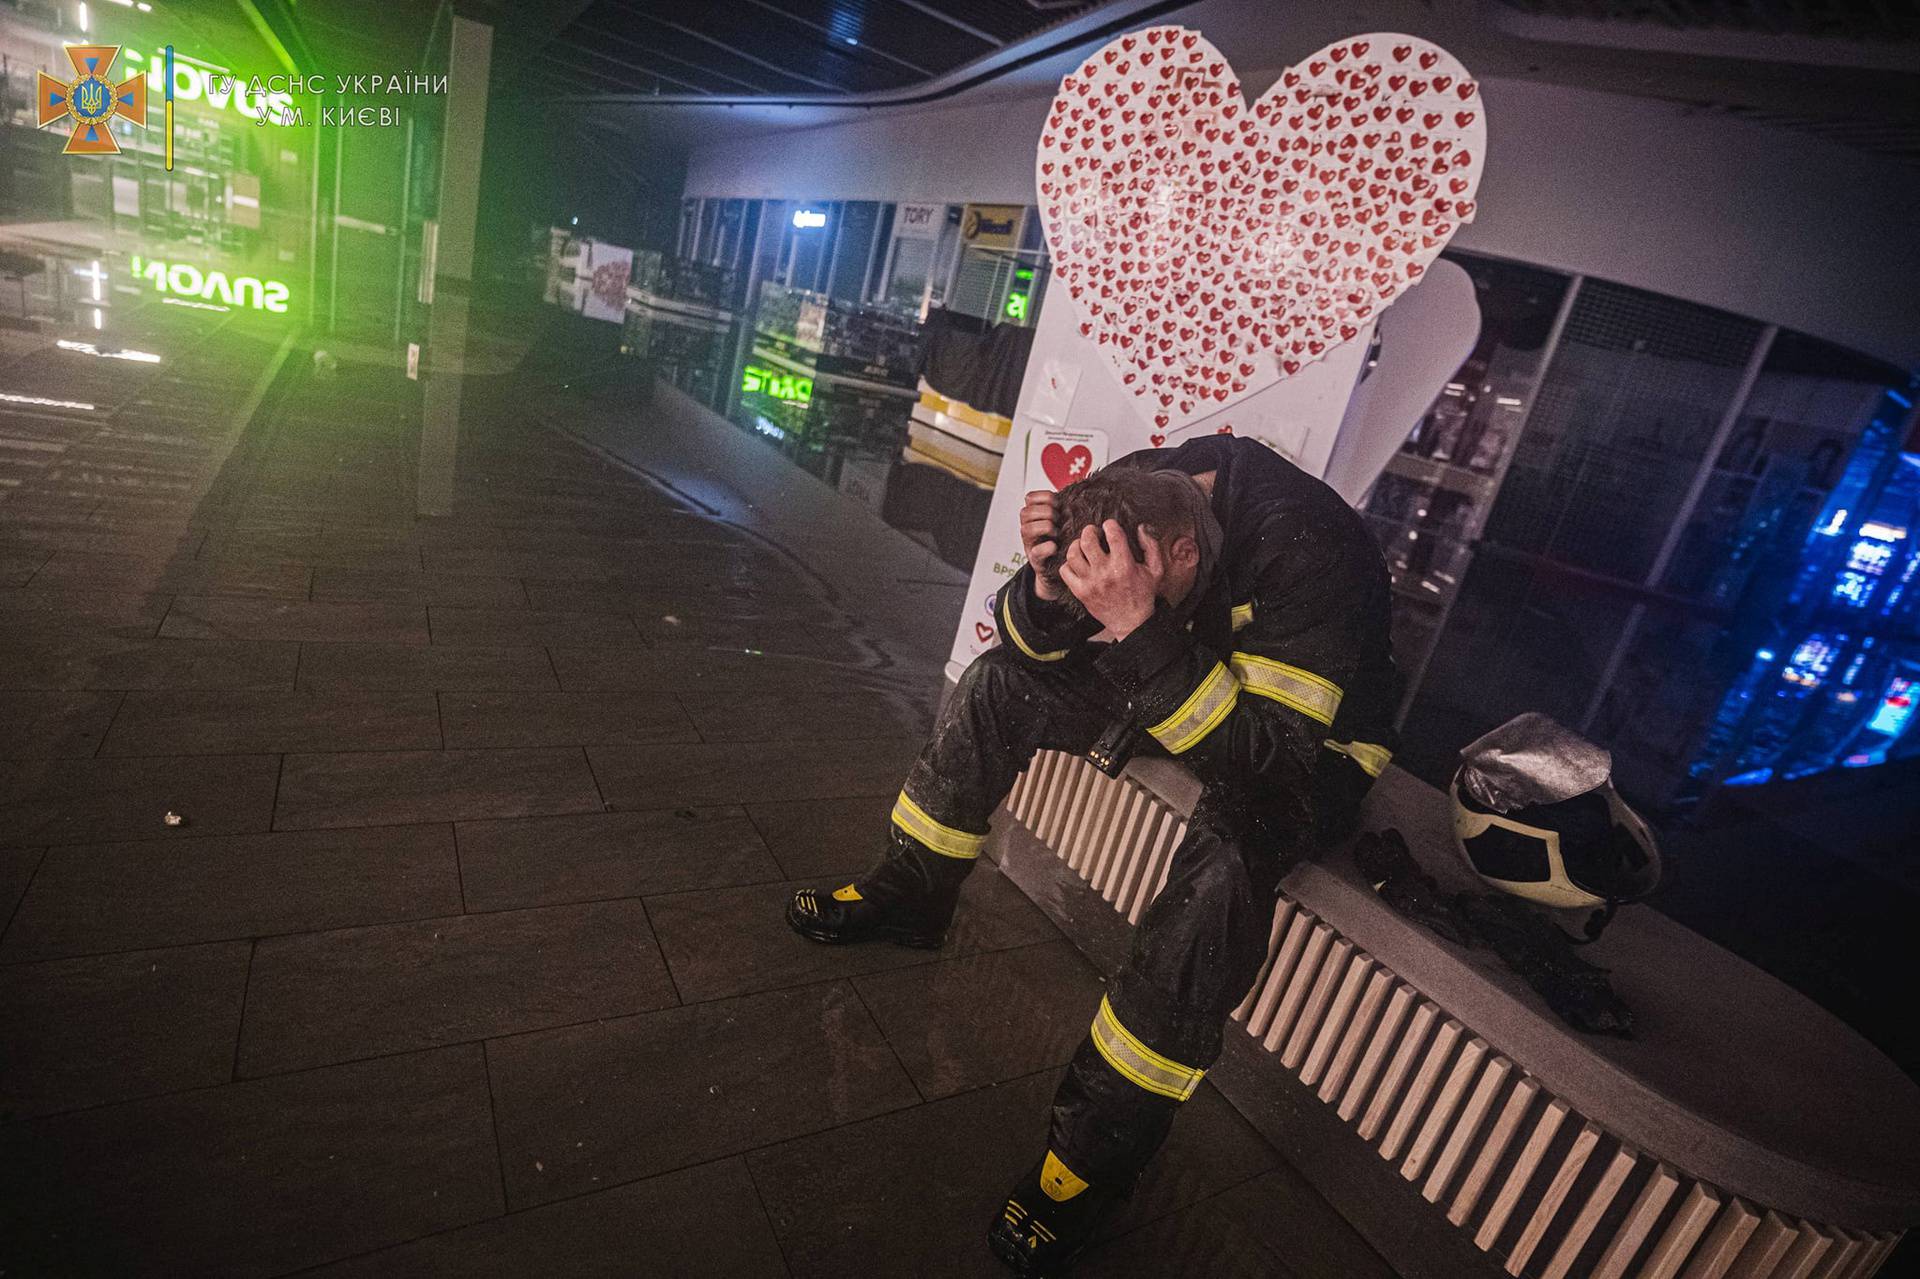 A rescuer reacts inside a shopping mall damaged by an airstrike in Kyiv